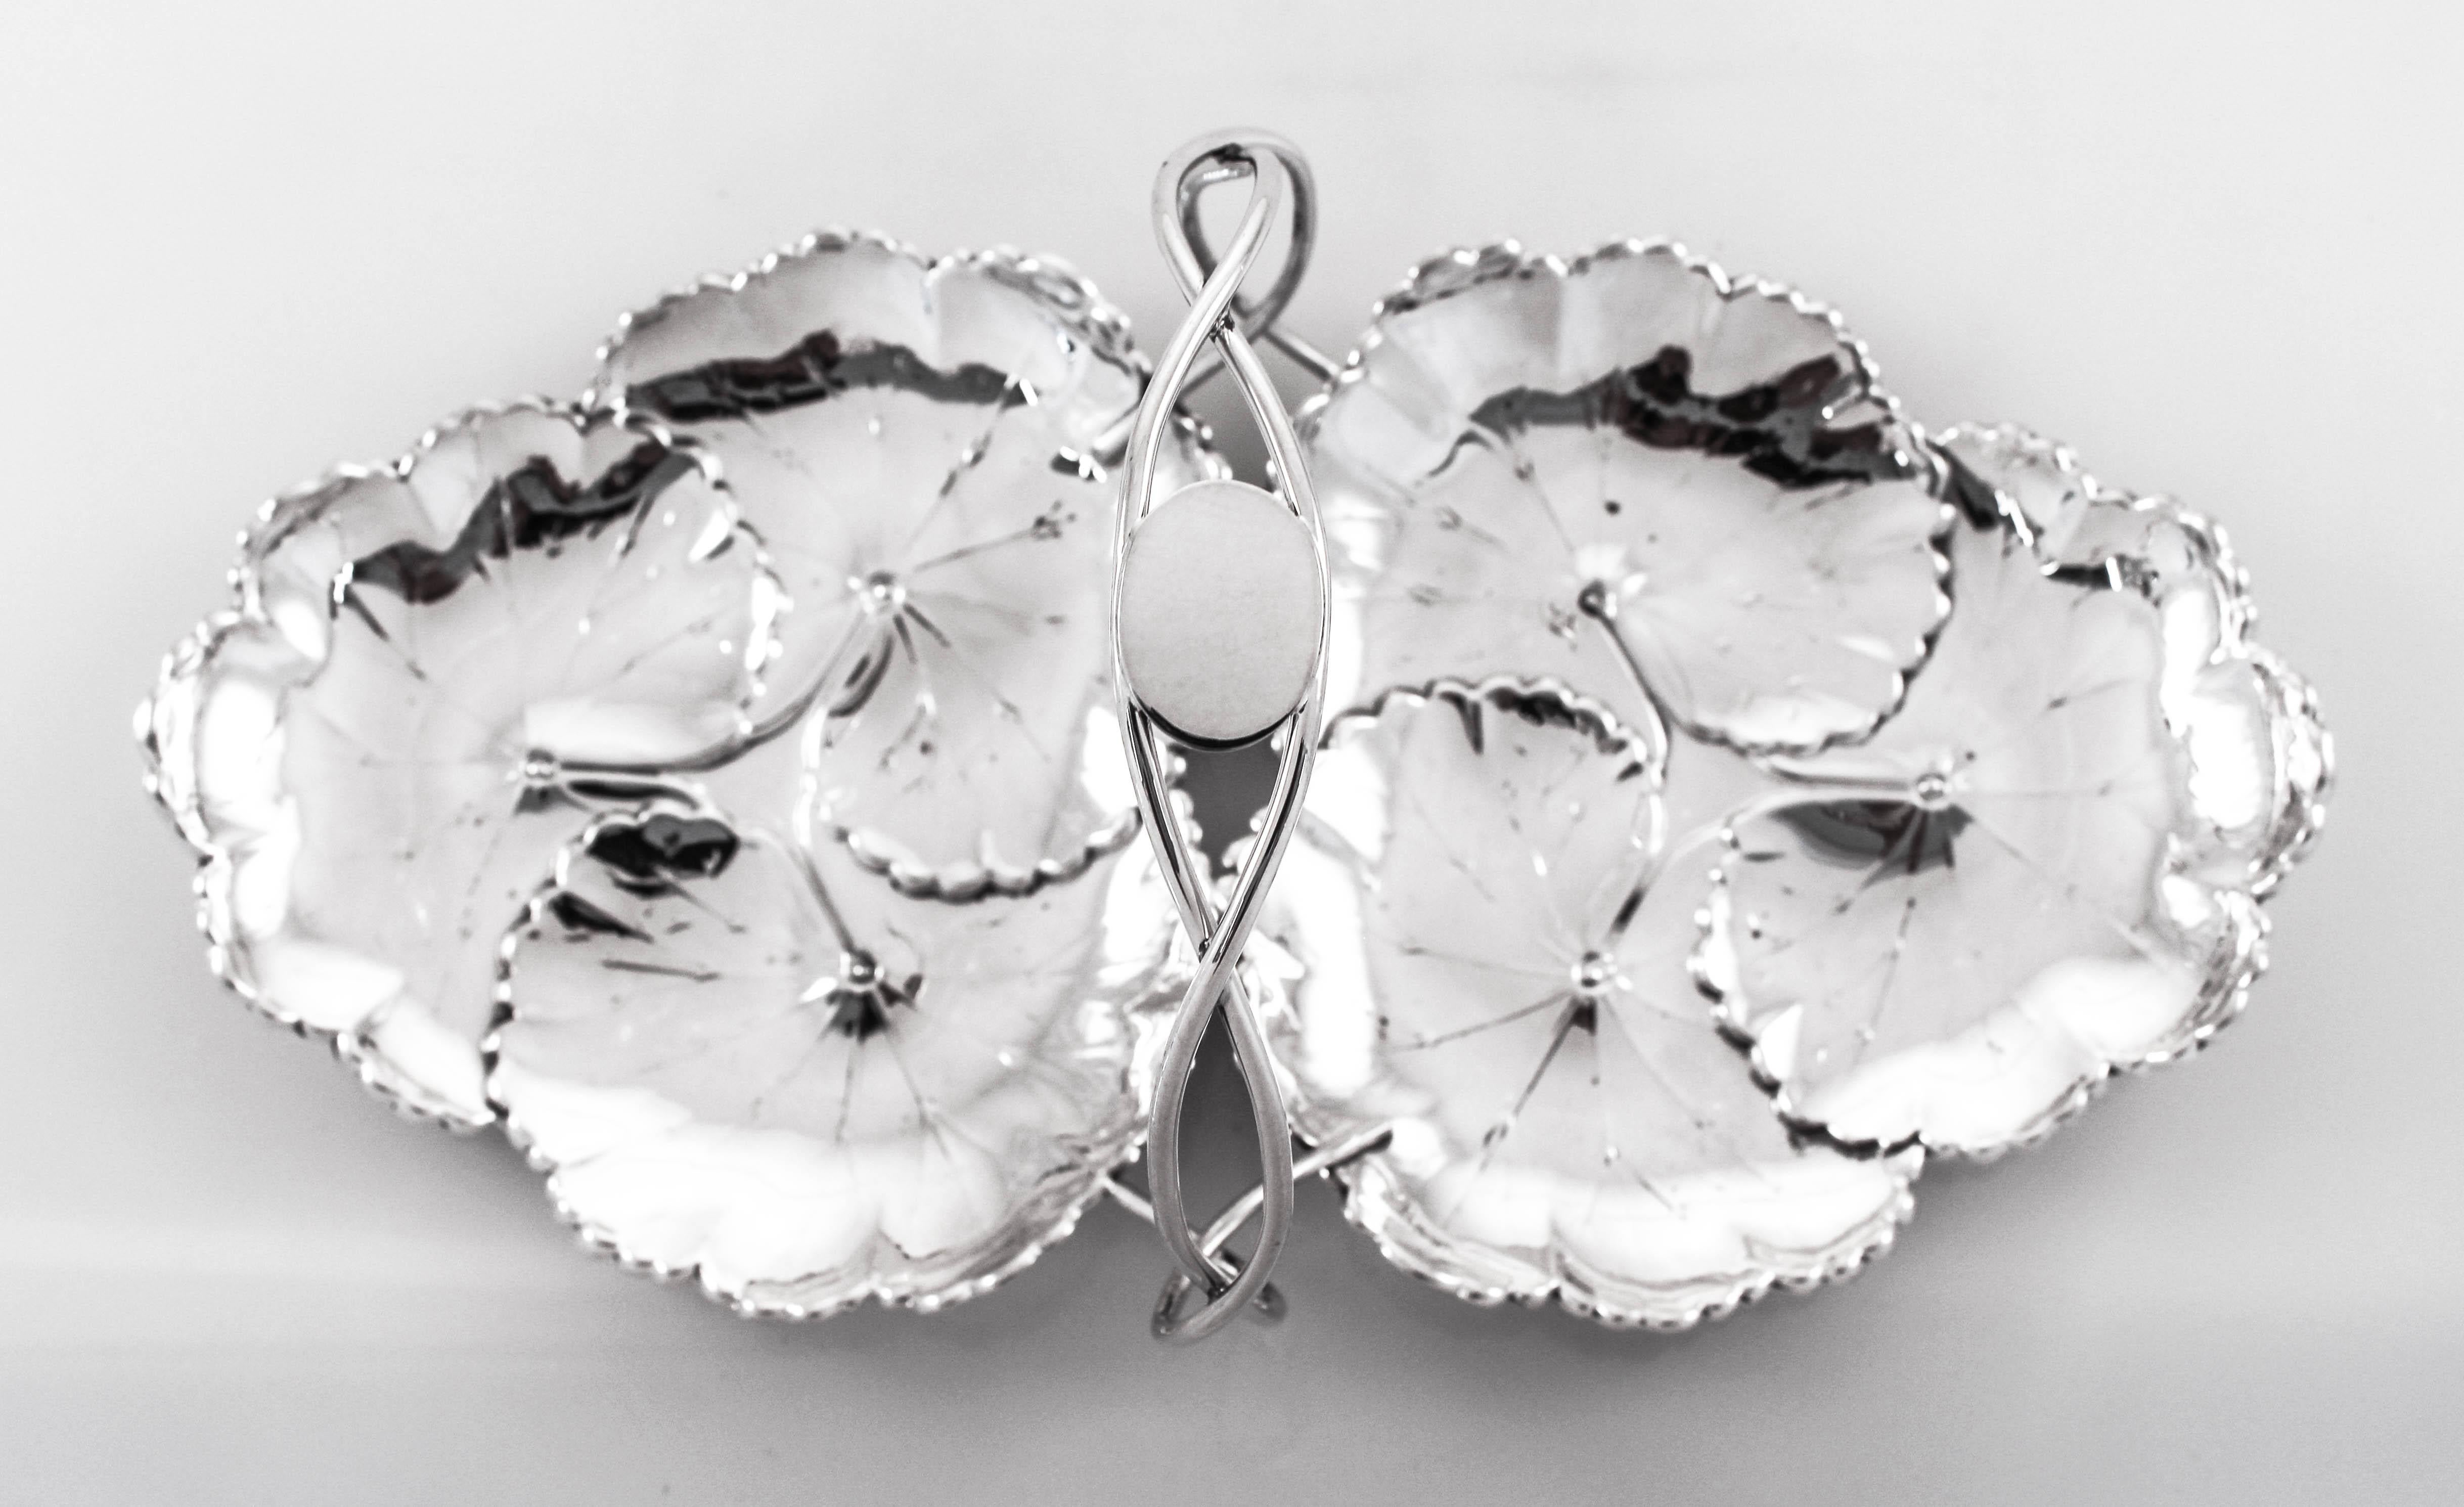 This sterling silver dish has a handle in the centre and connects two seemingly separate dishes together. Designed and manufactured at the height of the Art Nouveau movement in the early 20th century, each dish is shaped and designed to look like